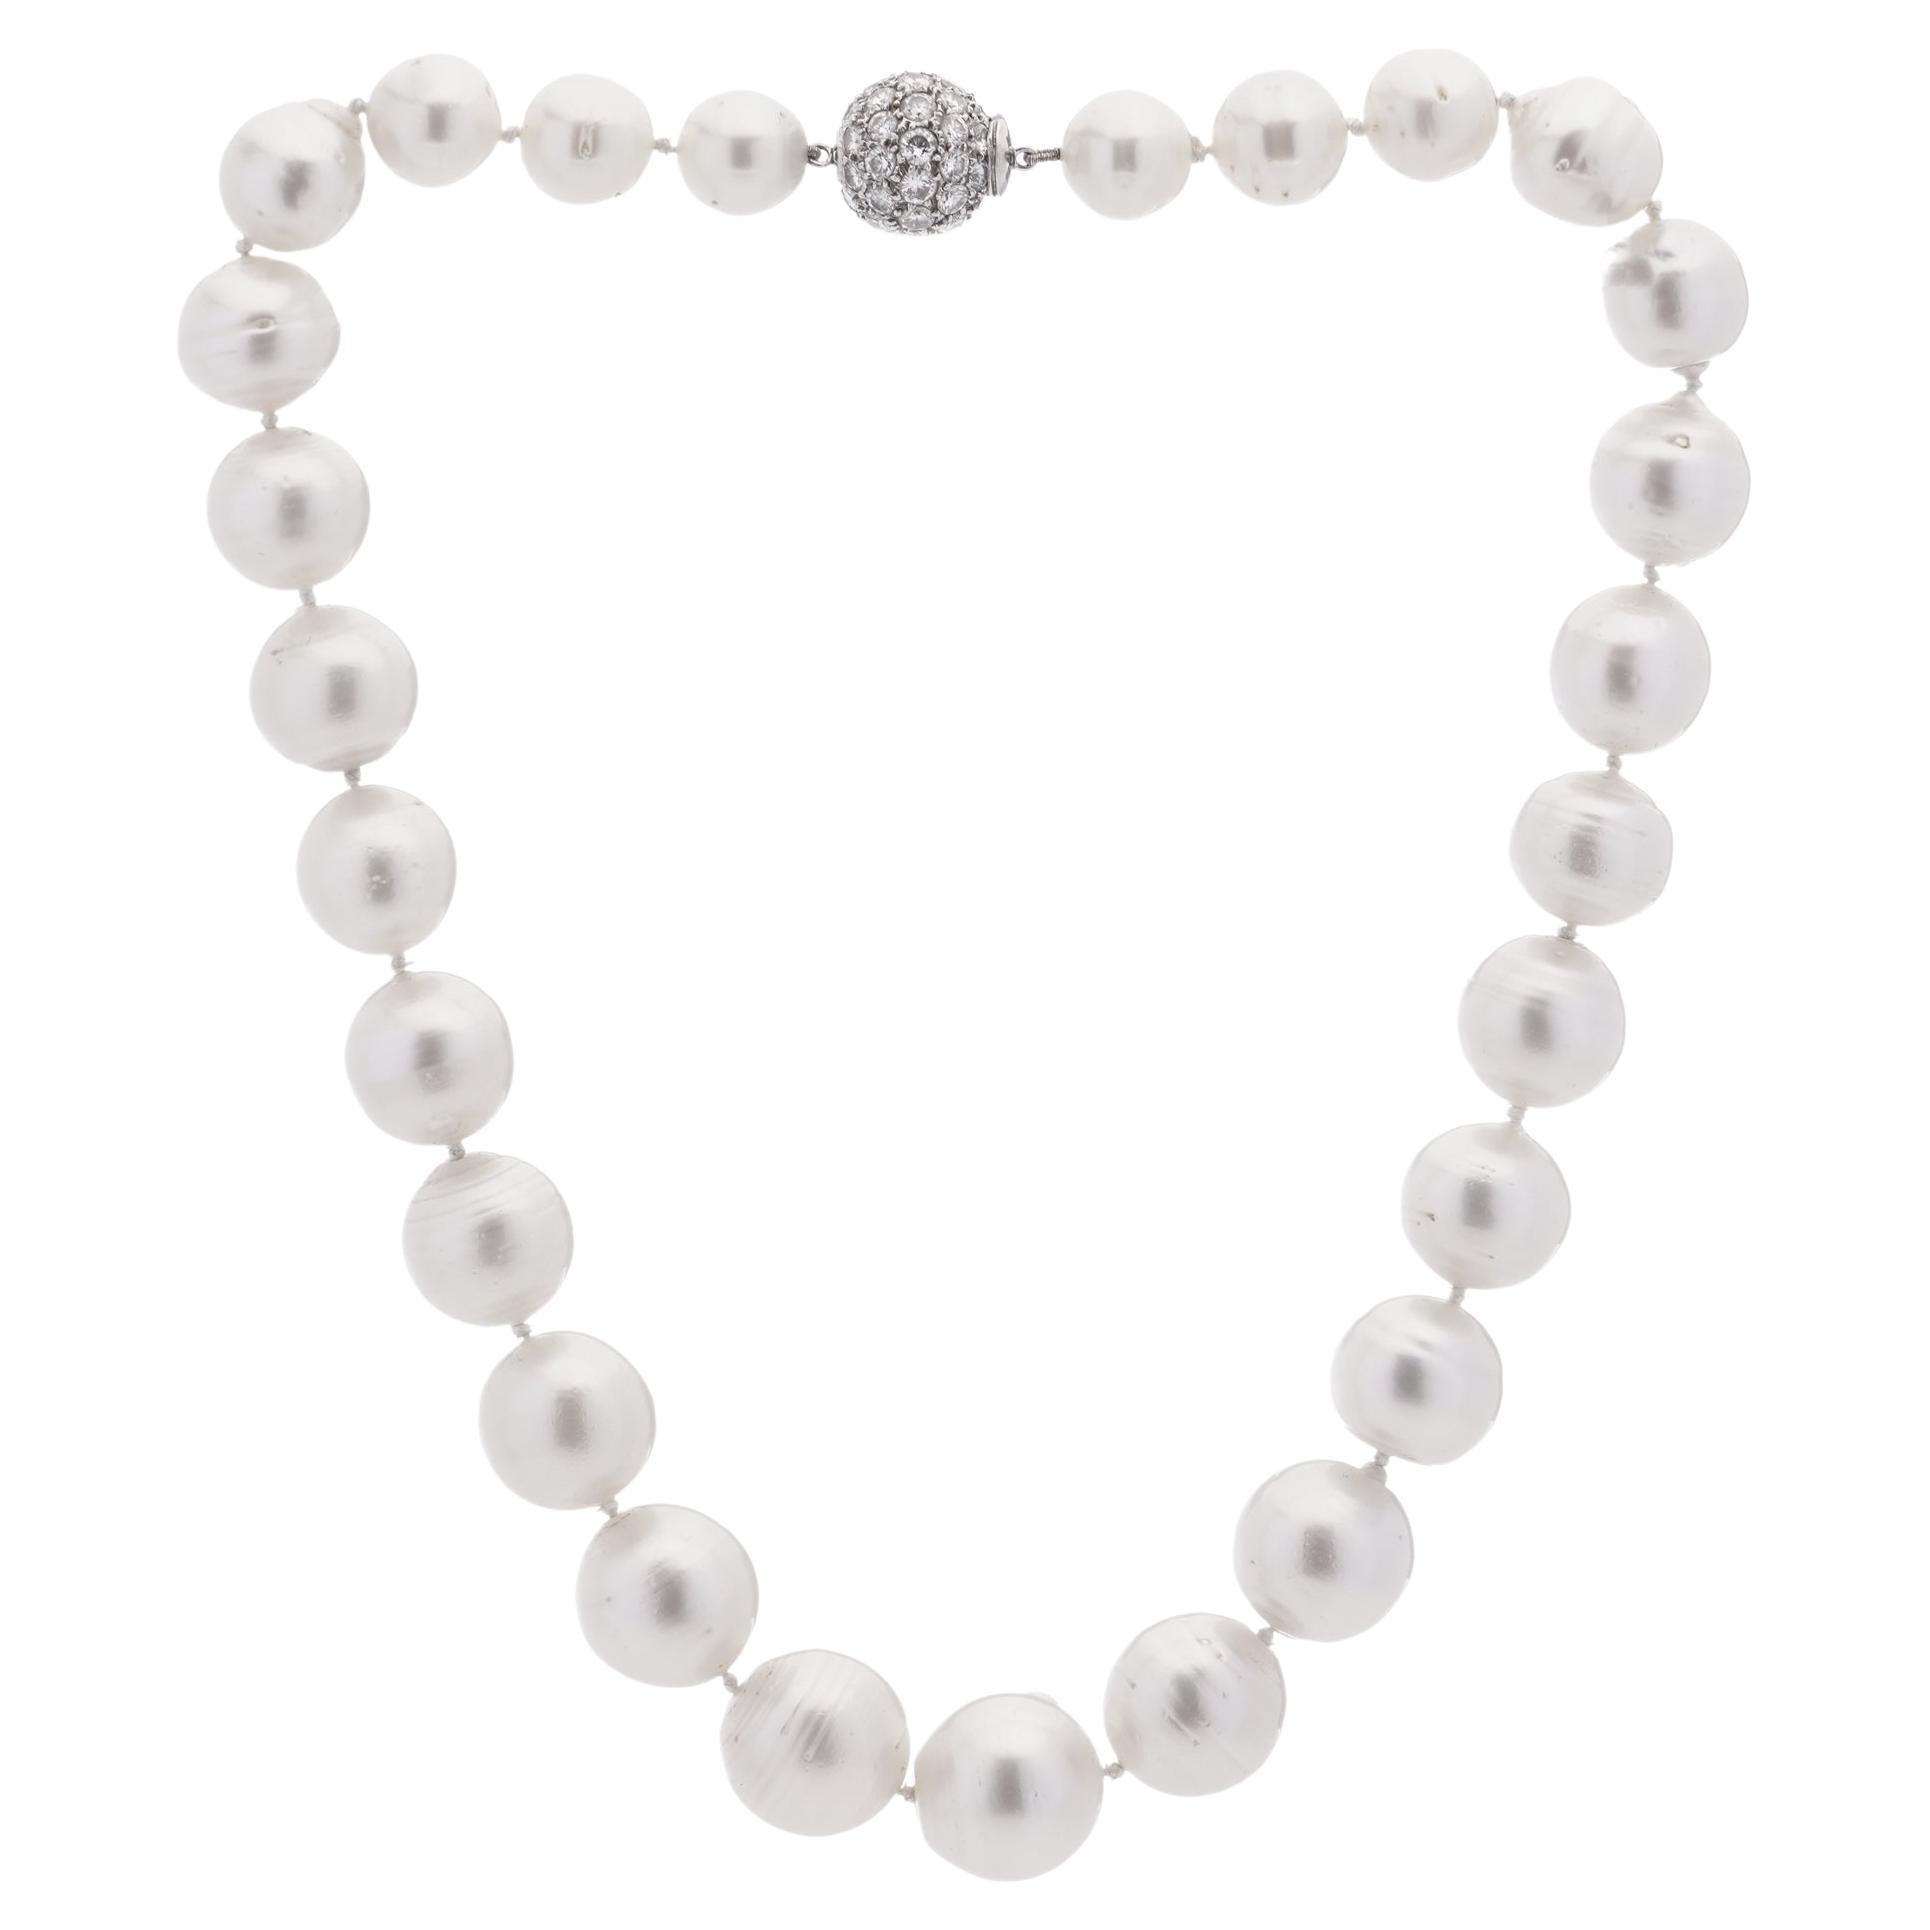 Graduated Cultured South Sea Pearl Necklace Set with 18k Gold Ball Clasp